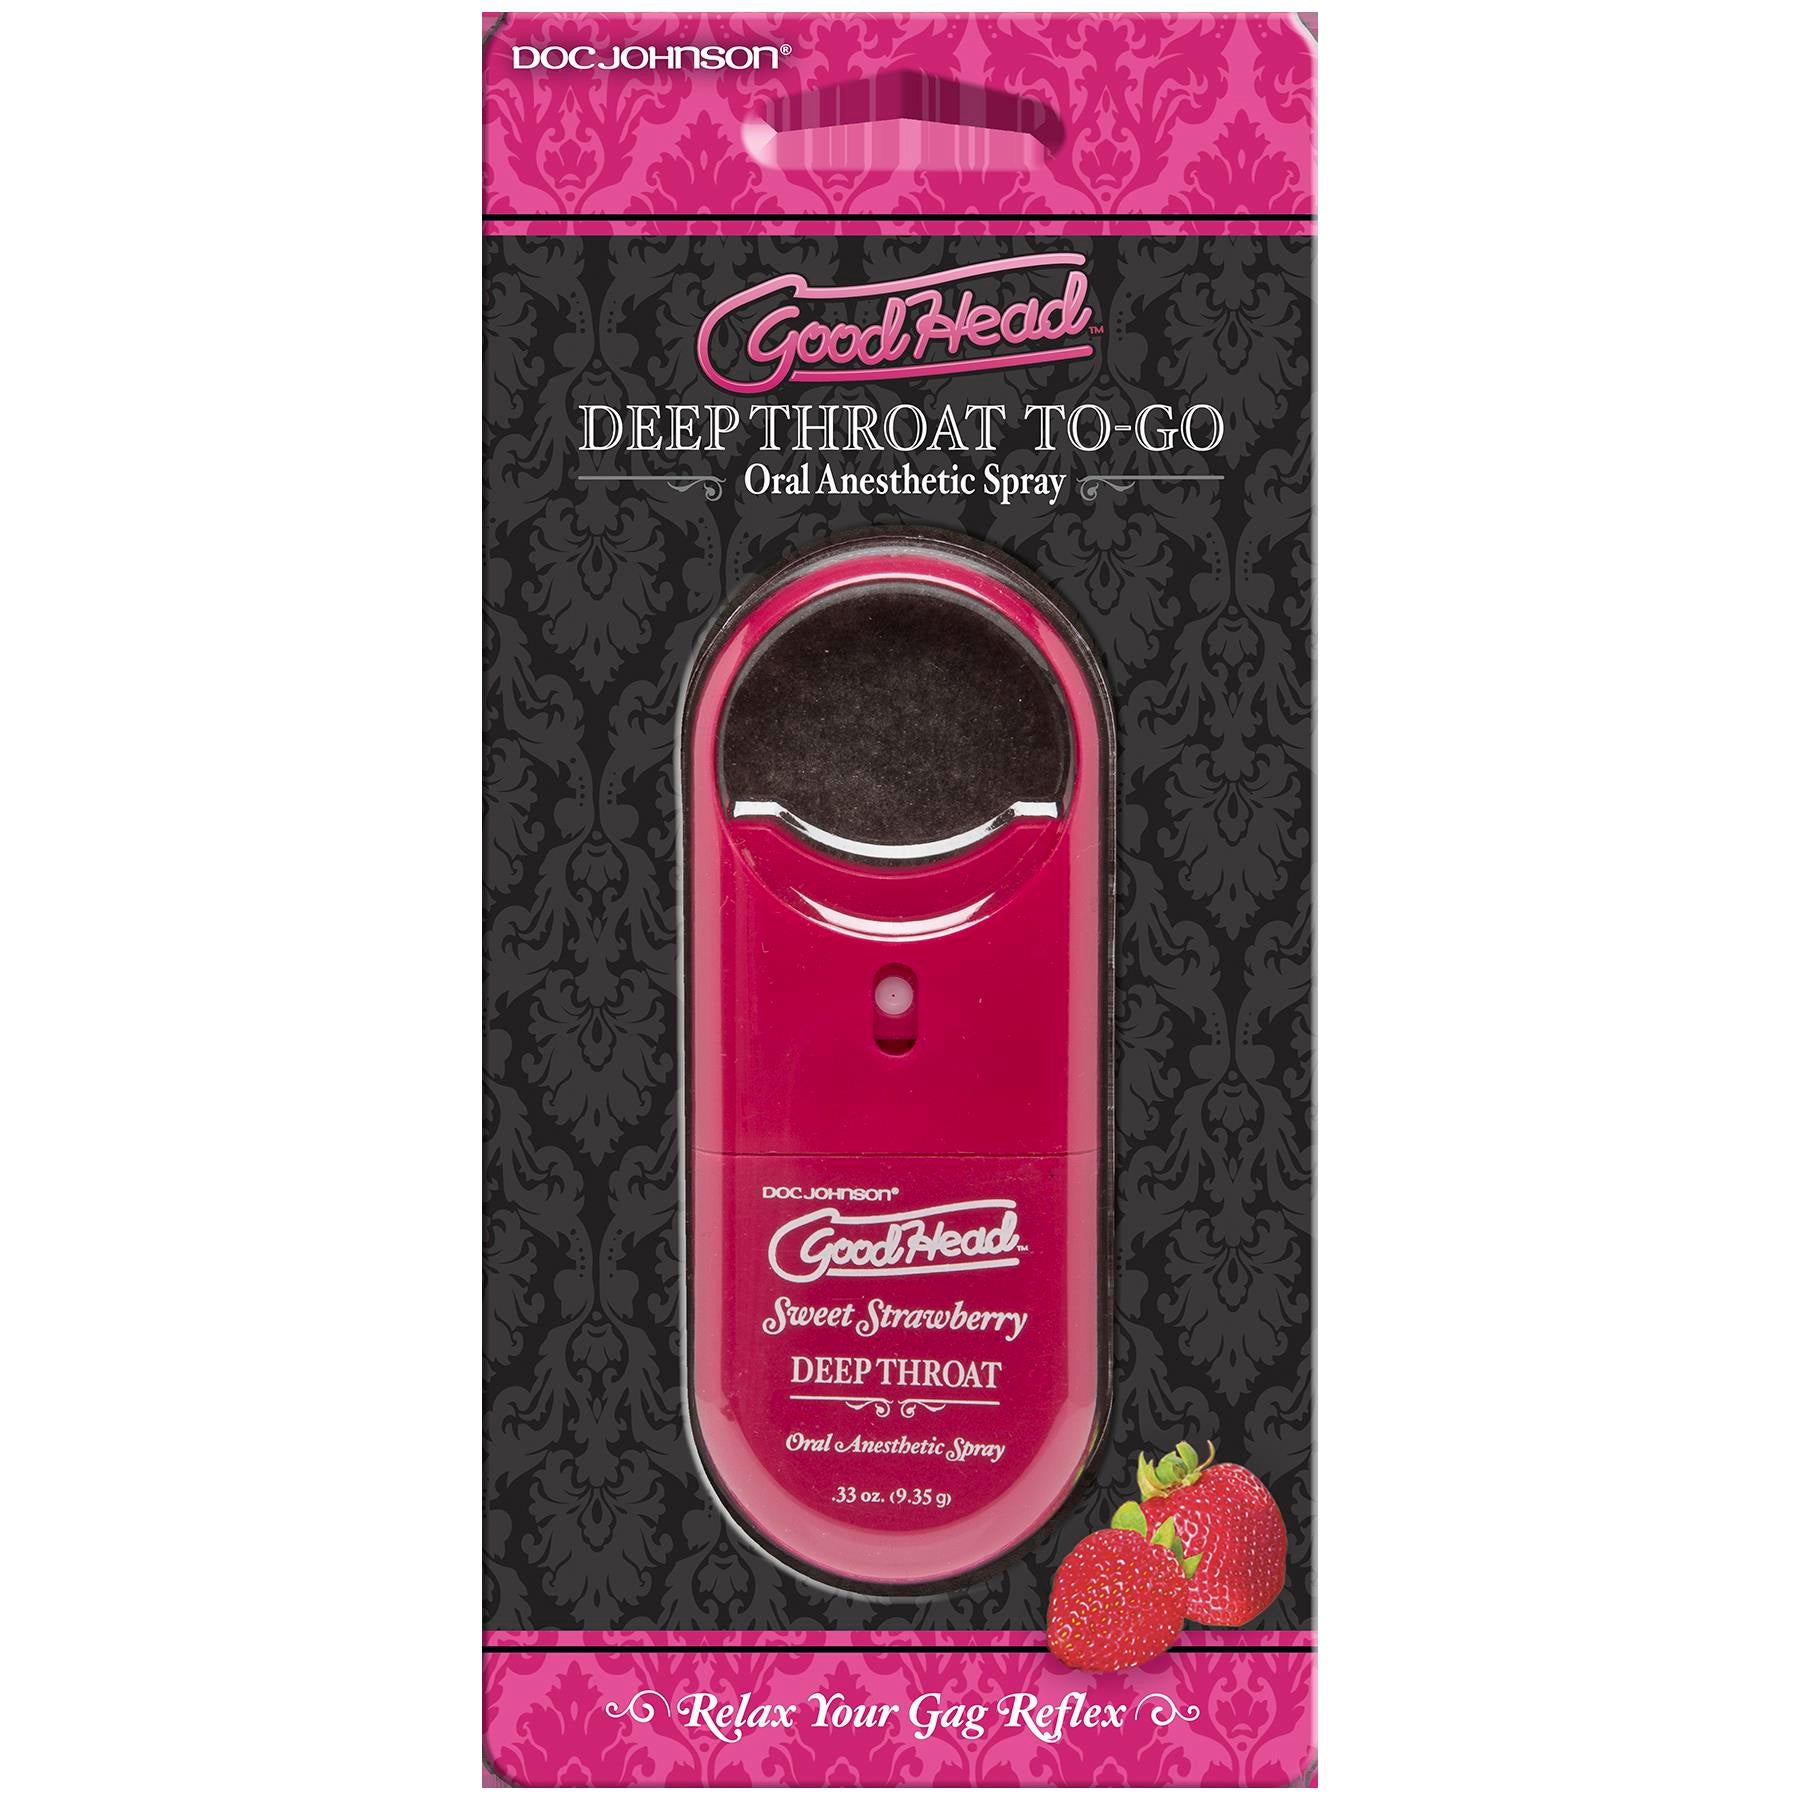 Doc Johnson GoodHead To-Go Deep Throat Sweet Strawberry Oral Anesthetic Spray - Extreme Toyz Singapore - https://extremetoyz.com.sg - Sex Toys and Lingerie Online Store - Bondage Gear / Vibrators / Electrosex Toys / Wireless Remote Control Vibes / Sexy Lingerie and Role Play / BDSM / Dungeon Furnitures / Dildos and Strap Ons &nbsp;/ Anal and Prostate Massagers / Anal Douche and Cleaning Aide / Delay Sprays and Gels / Lubricants and more...